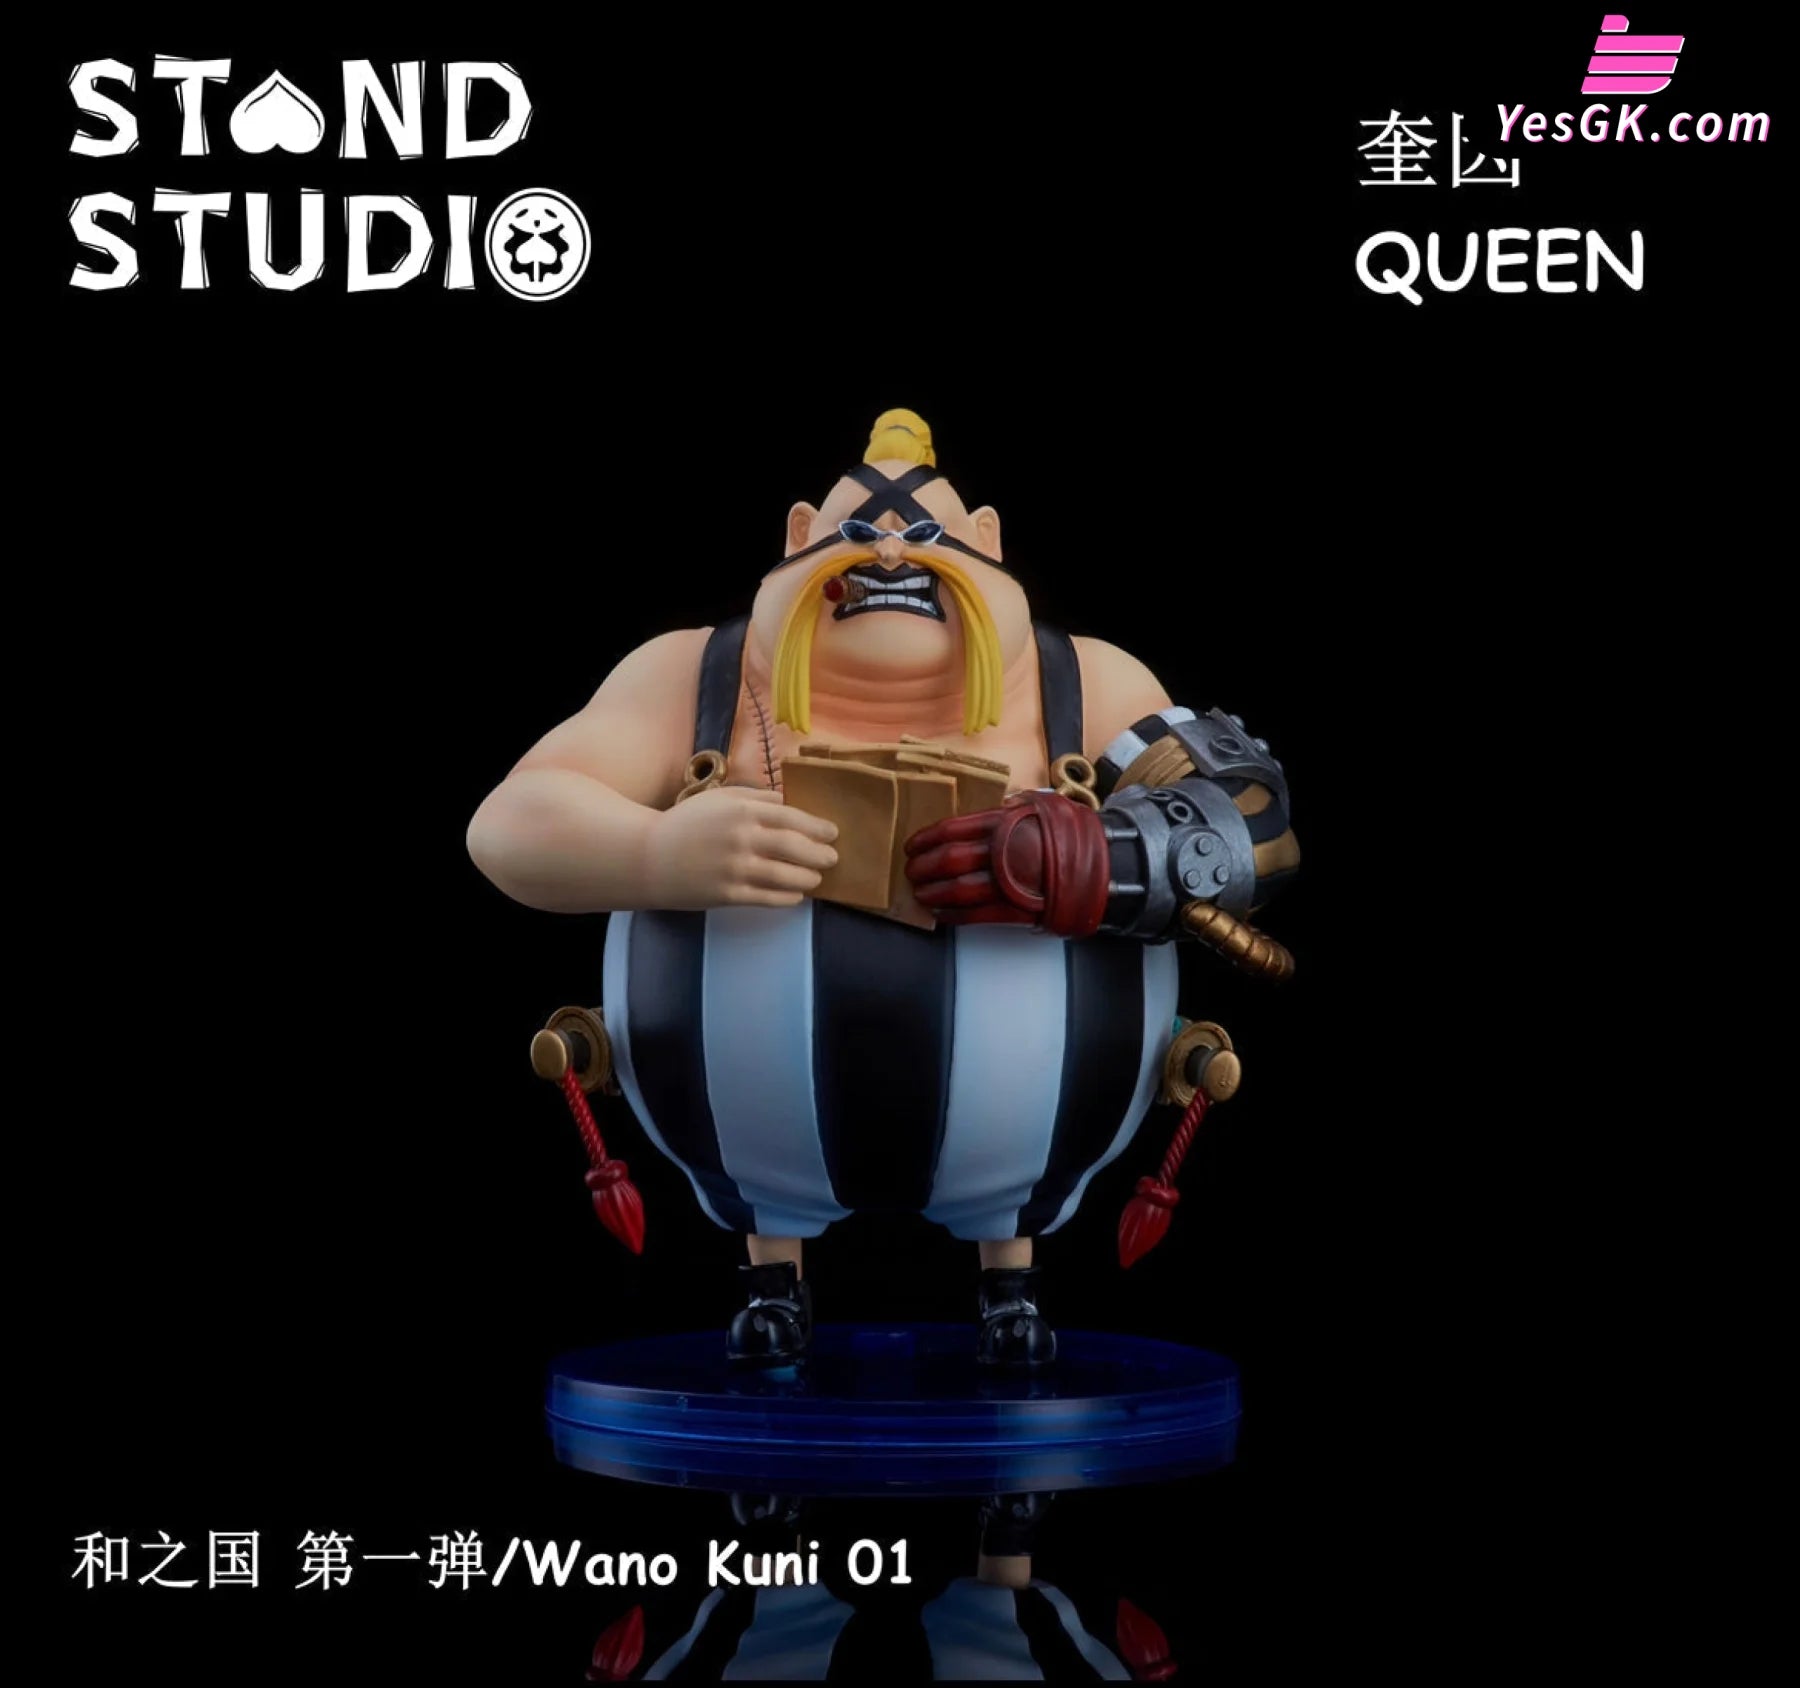 One Piece Wano Country Series Queen Resin Statue - Stand Studio [Pre-Order Closed] Full Payment /